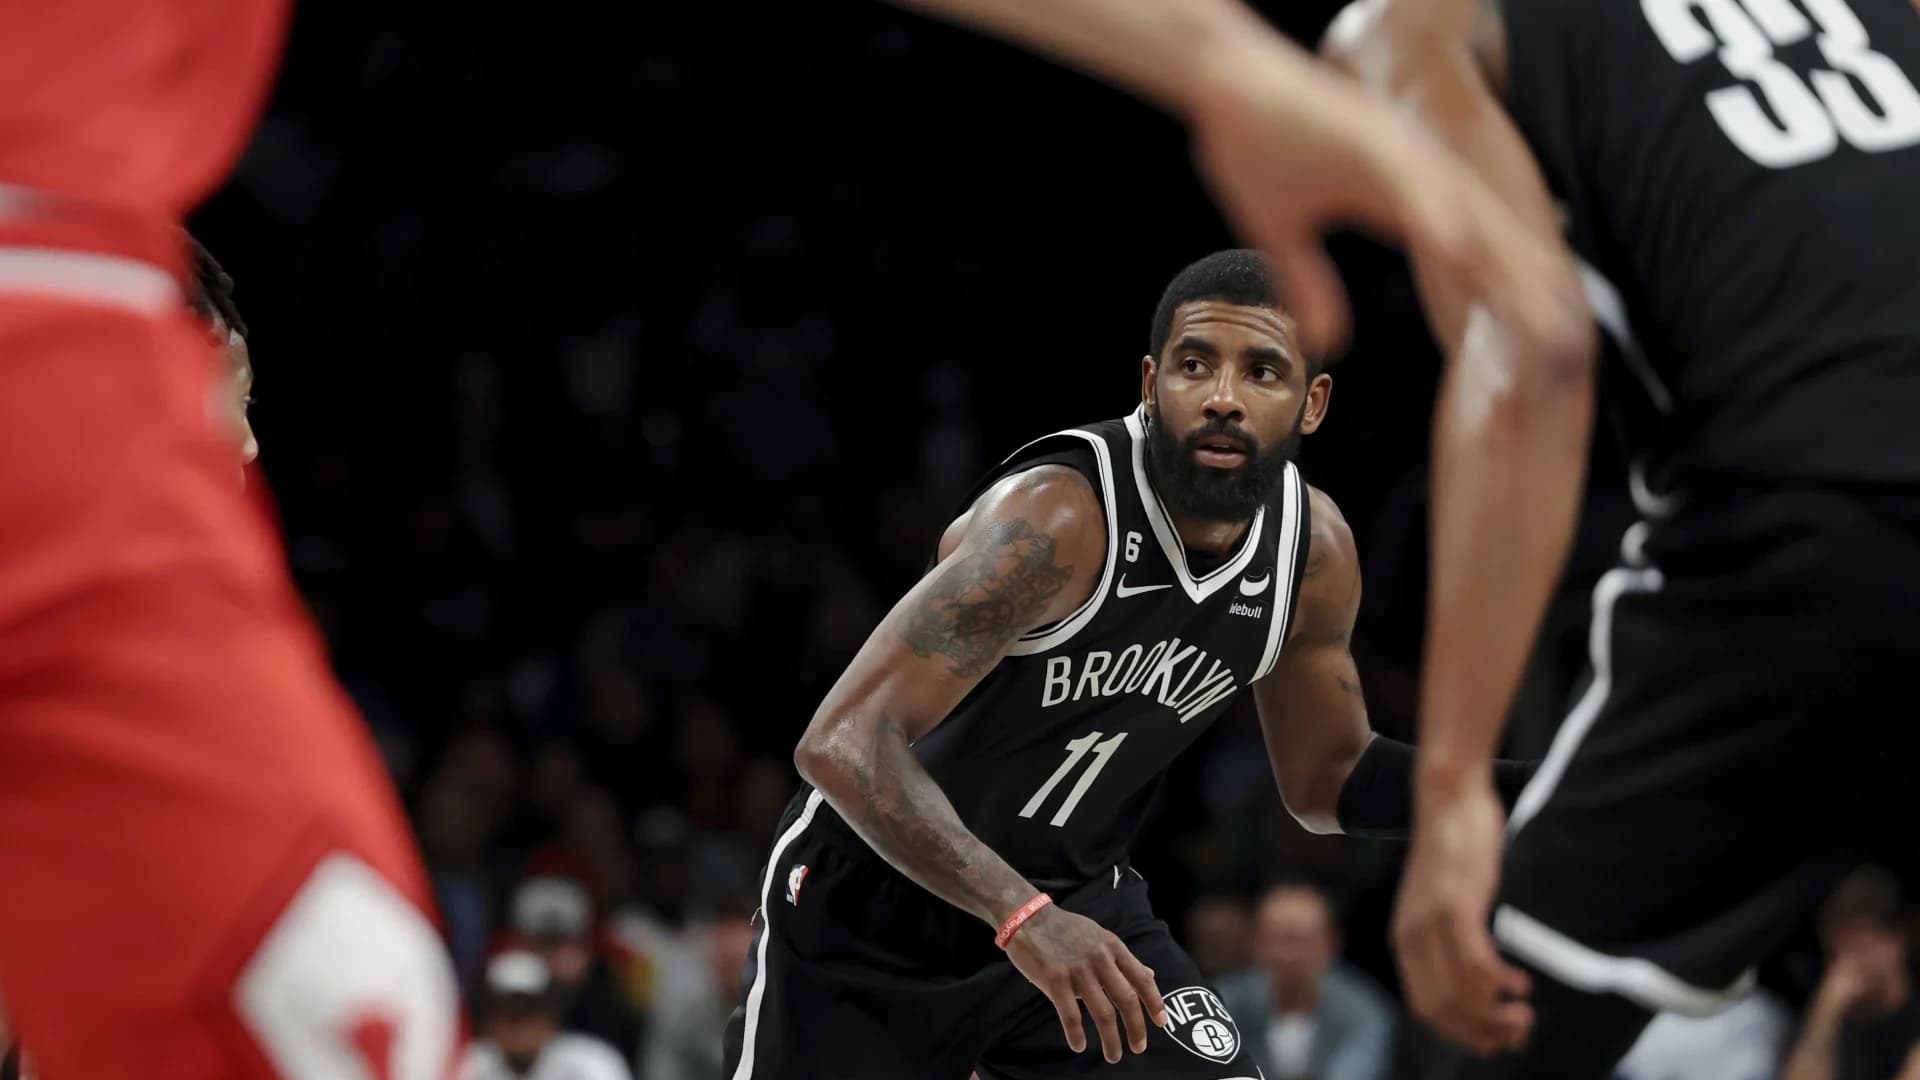 Nets coach Vaughn has no update on when Irving might return